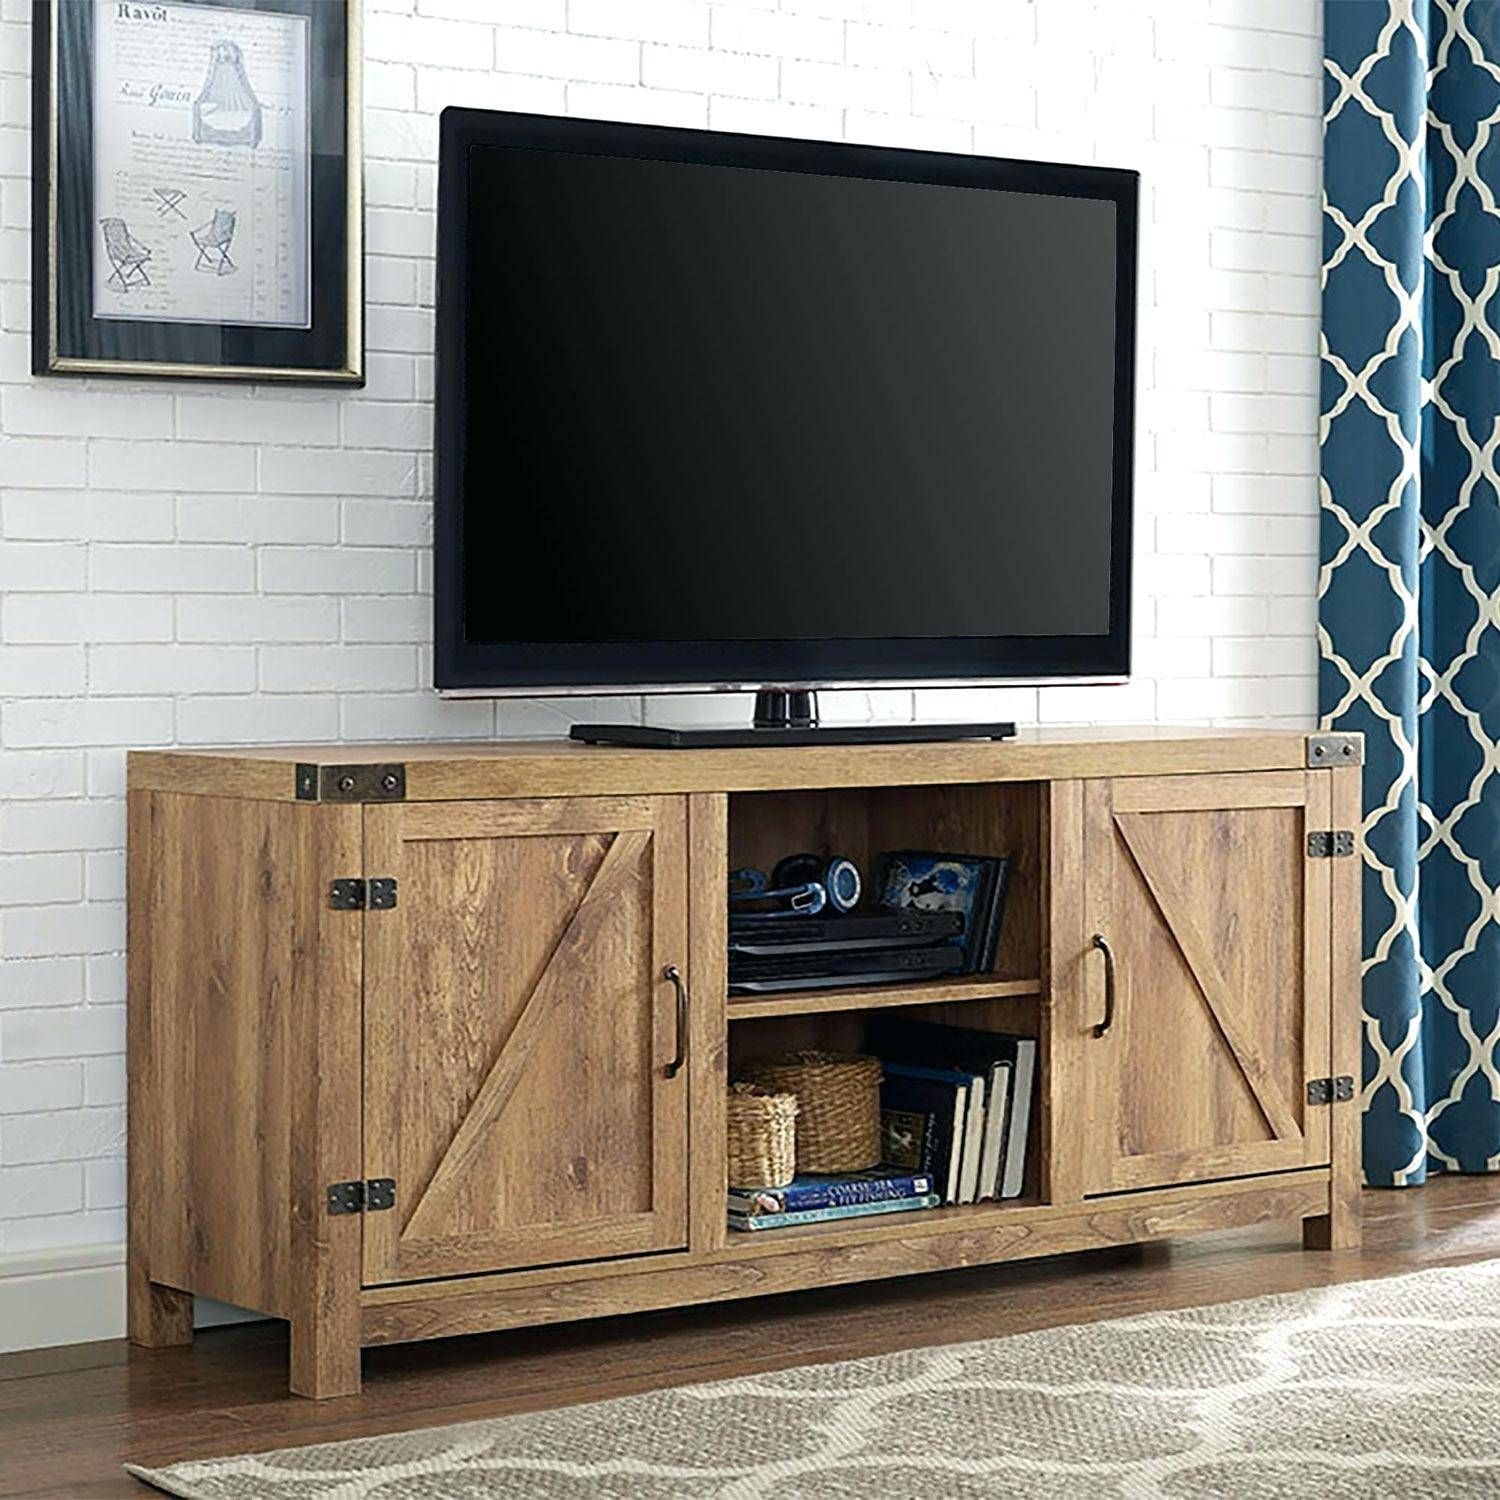 Tv Stand : 81 Surprising Open Bookcase Room Divider Home Design 48 Regarding Tv Stands With Matching Bookcases (View 6 of 15)